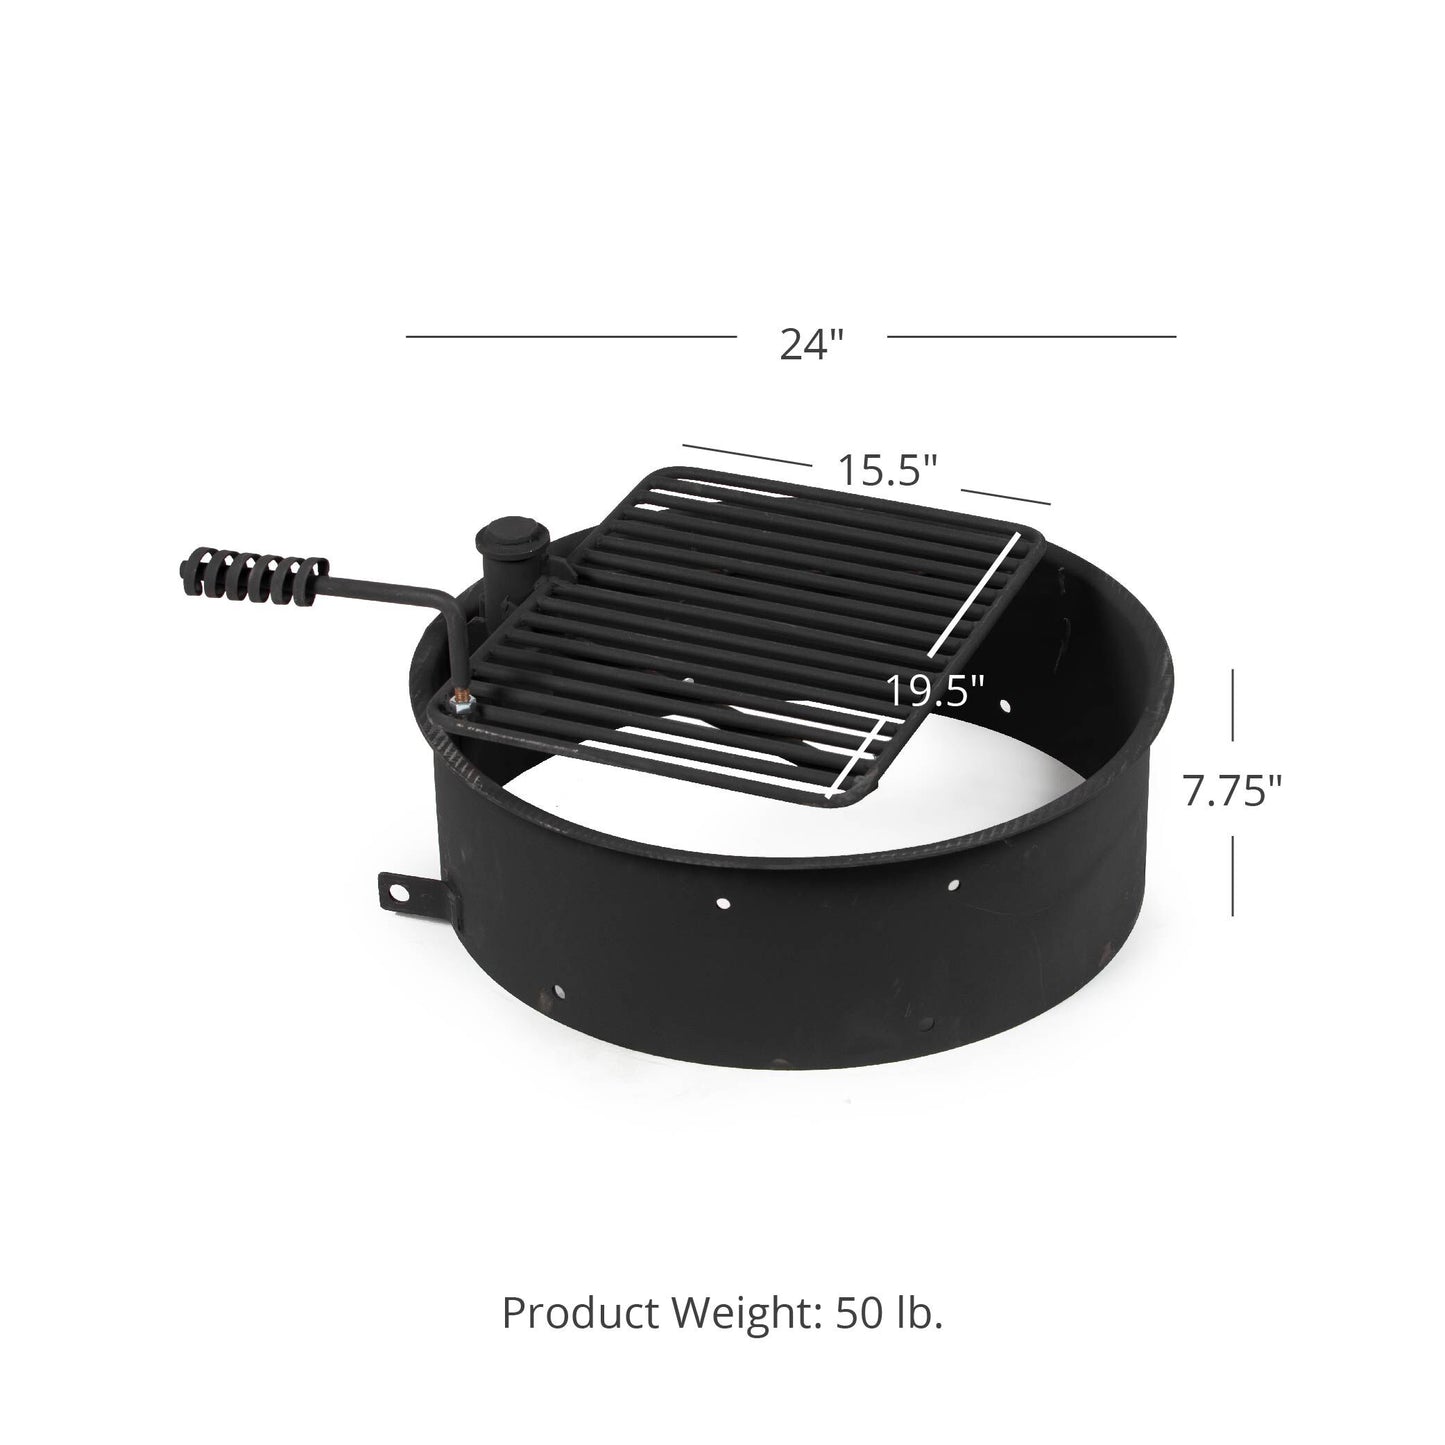 Steel Camp Fire Ring & Outdoor Cooking Grate - Fire Ring Size: 24" | 24" - view 6